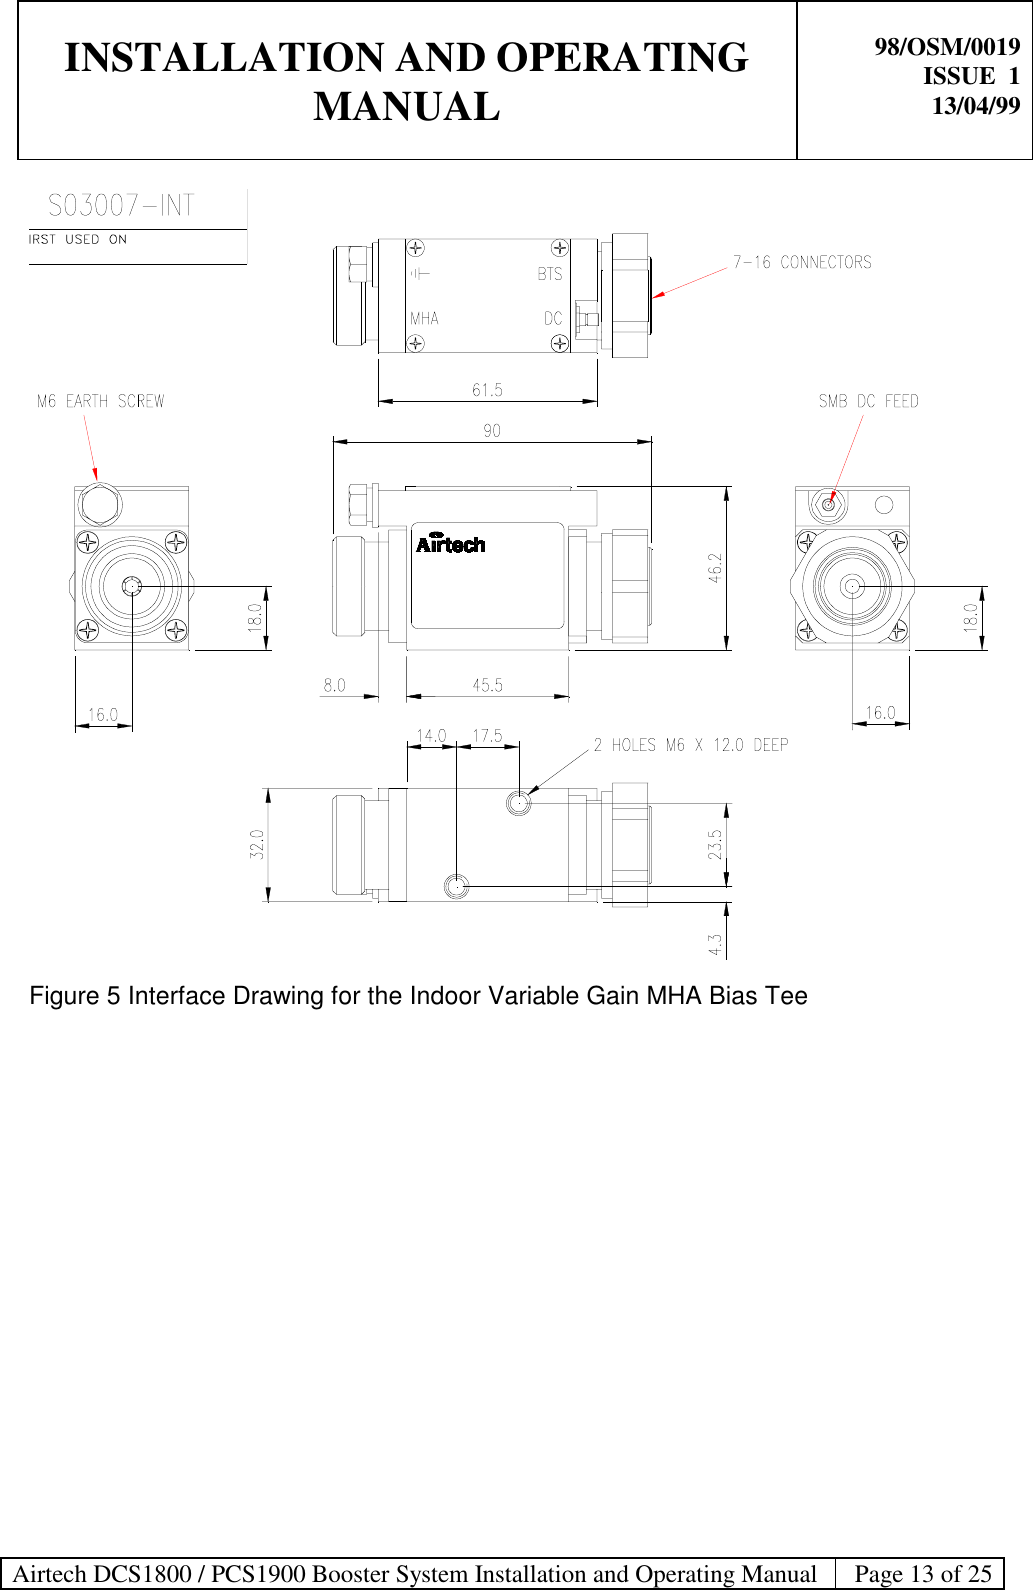 INSTALLATION AND OPERATINGMANUAL98/OSM/0019ISSUE  113/04/99Airtech DCS1800 / PCS1900 Booster System Installation and Operating Manual Page 13 of 25Figure 5 Interface Drawing for the Indoor Variable Gain MHA Bias Tee